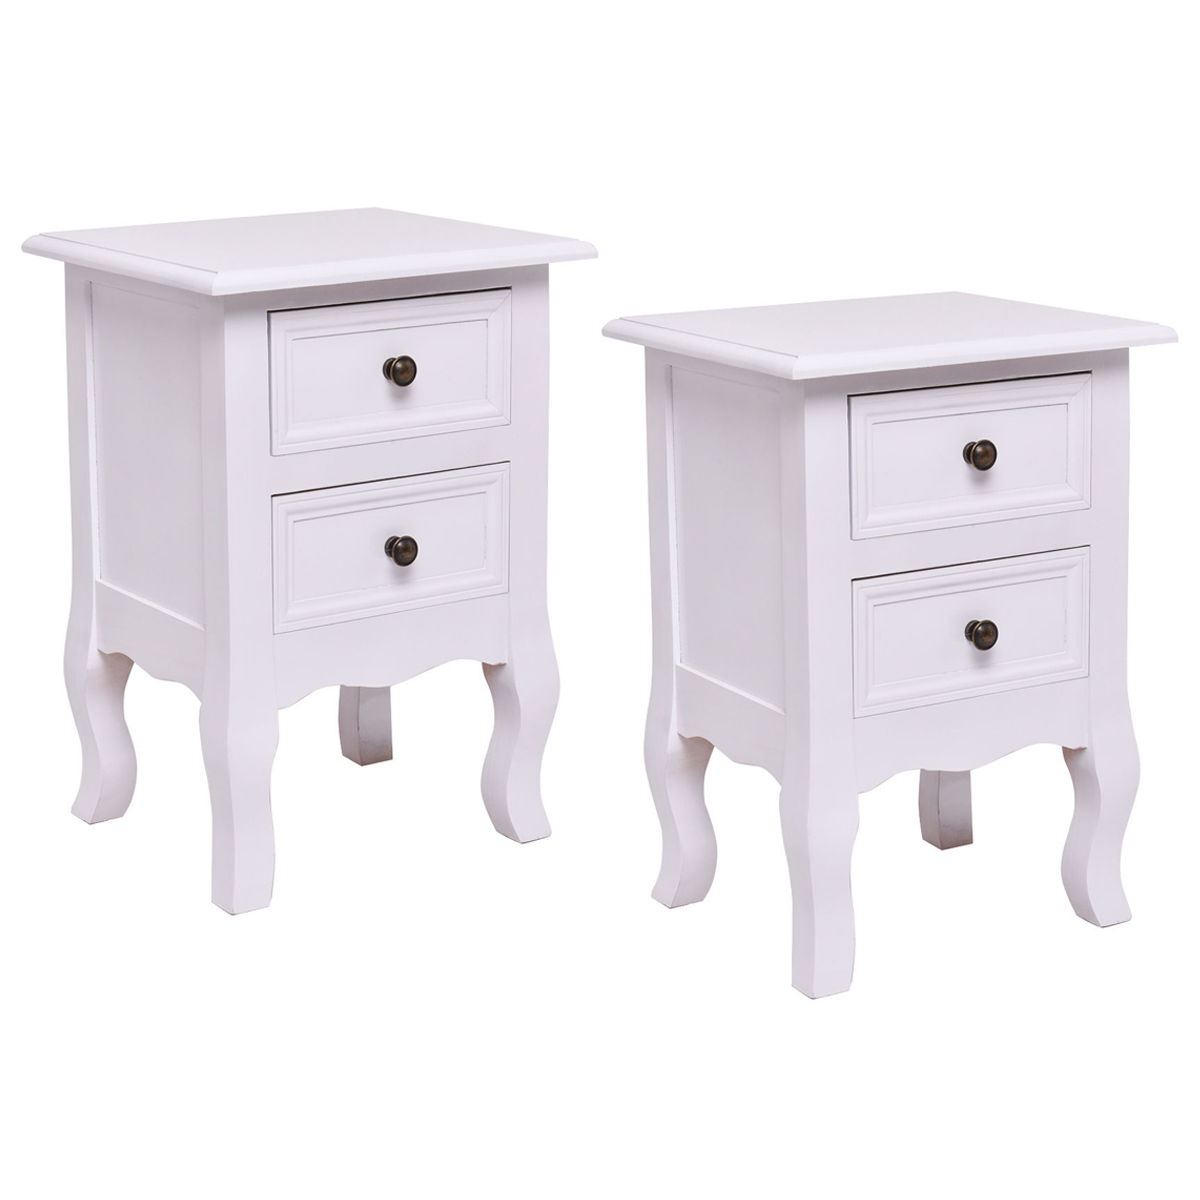 way curved legs accent side end table nigh stand tables with drawers furniture long wooden white round metal ikea bedroom storage ideas folding dinner coffee and matching mirrored